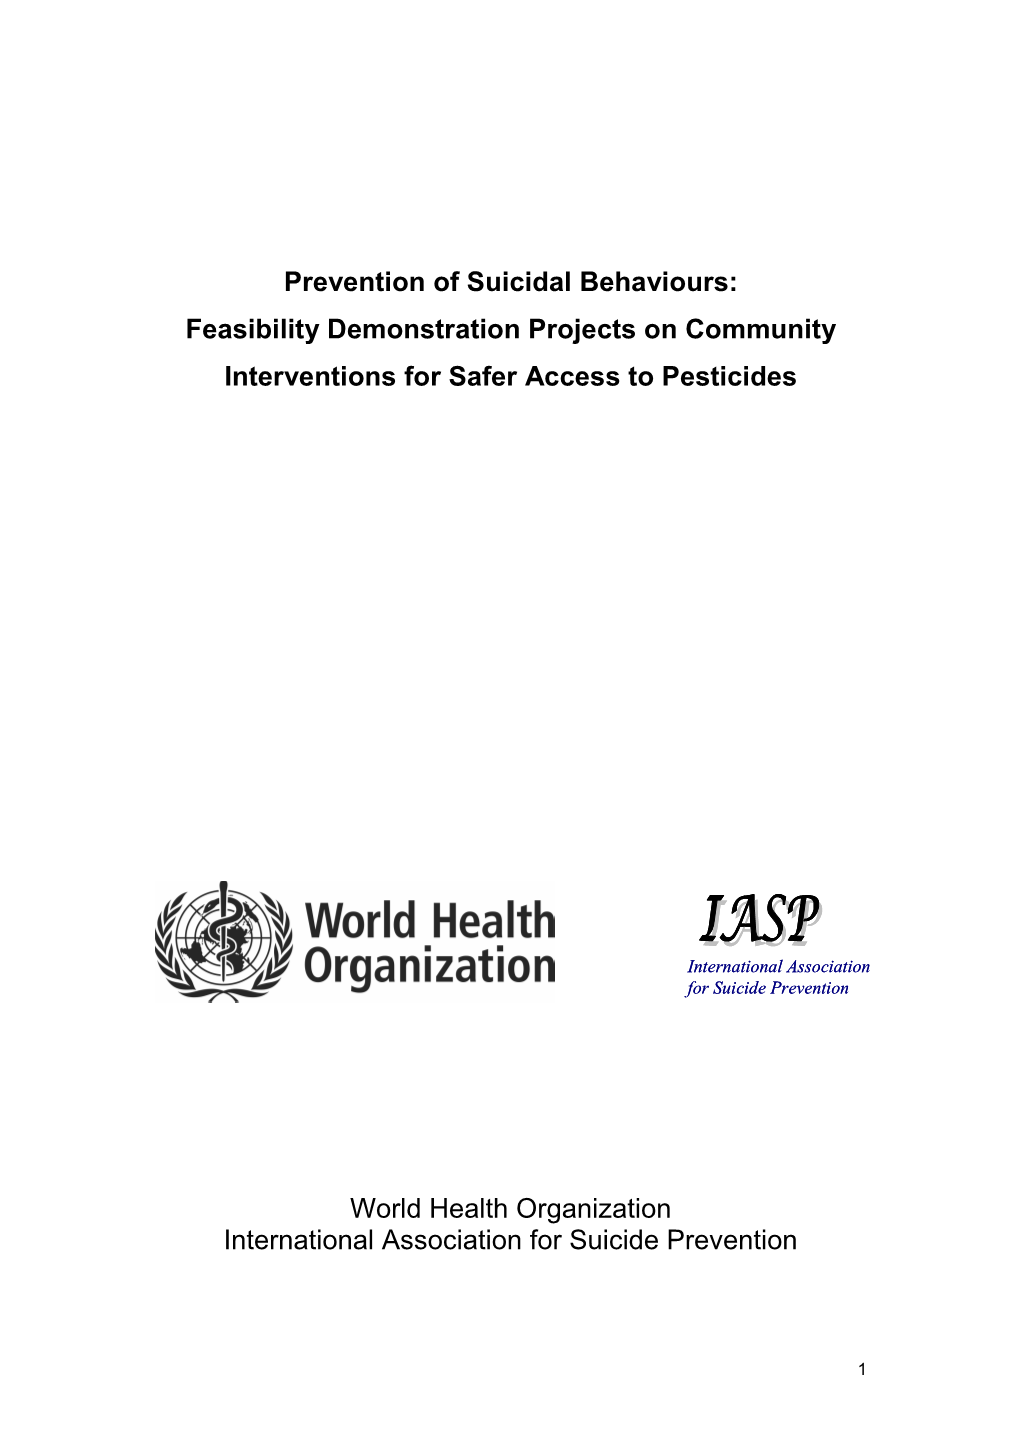 Prevention of Suicidal Behaviours: Feasibility Demonstration Projects on Community Interventions for Safer Access to Pesticides